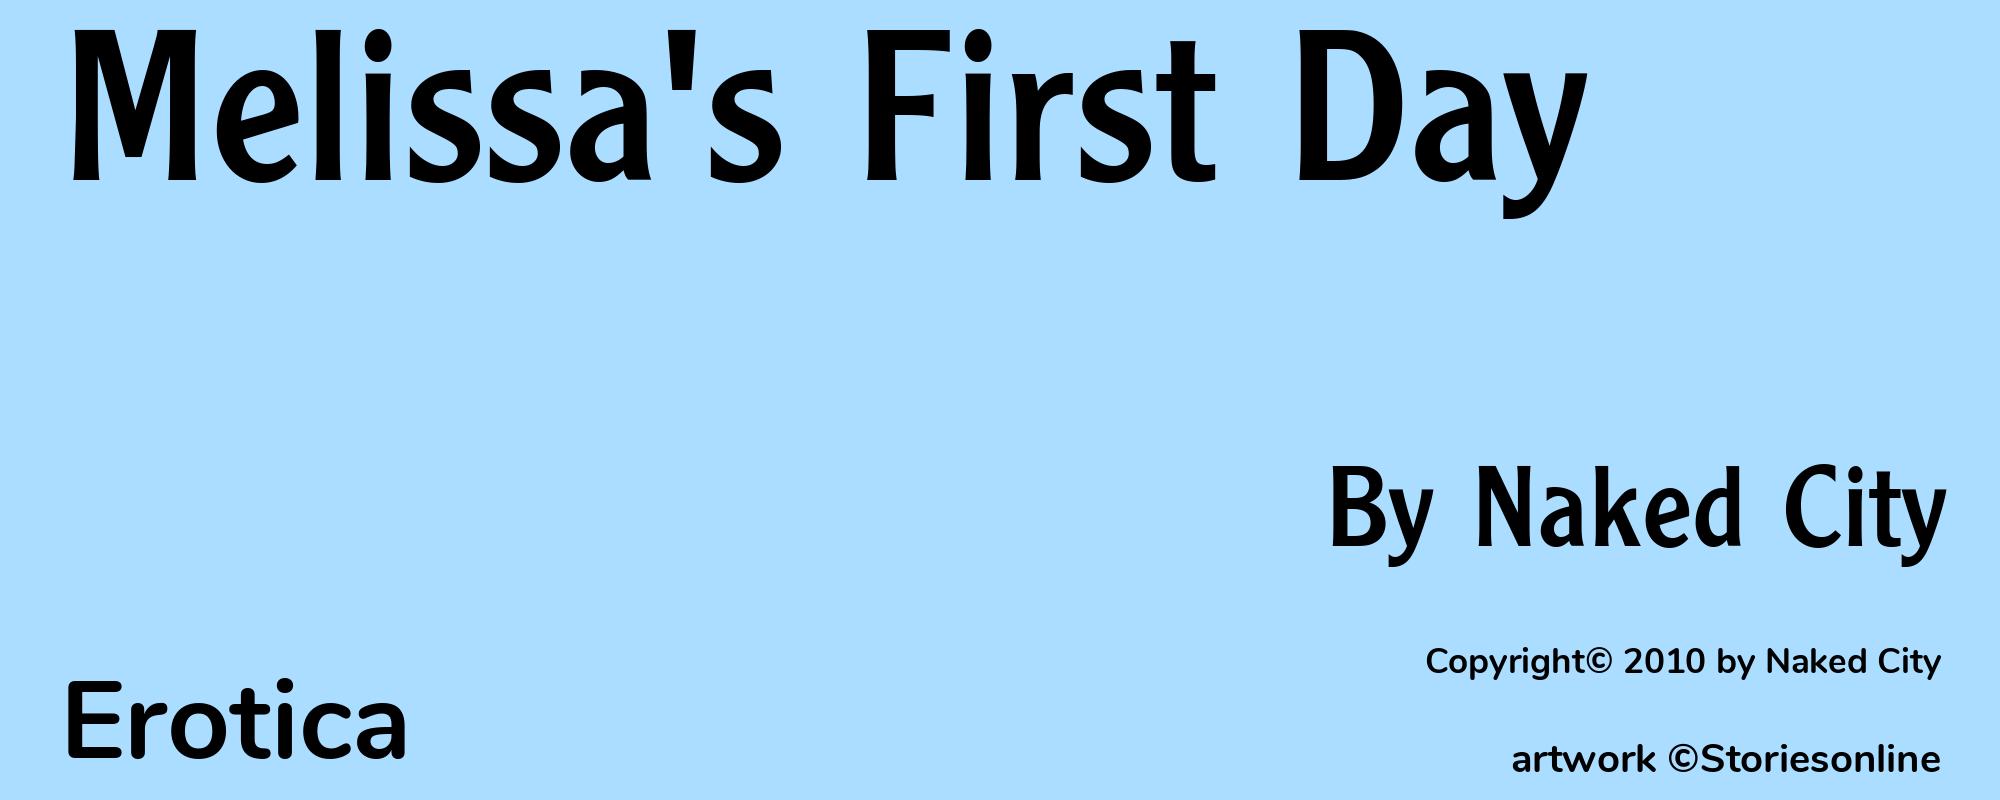 Melissa's First Day - Cover